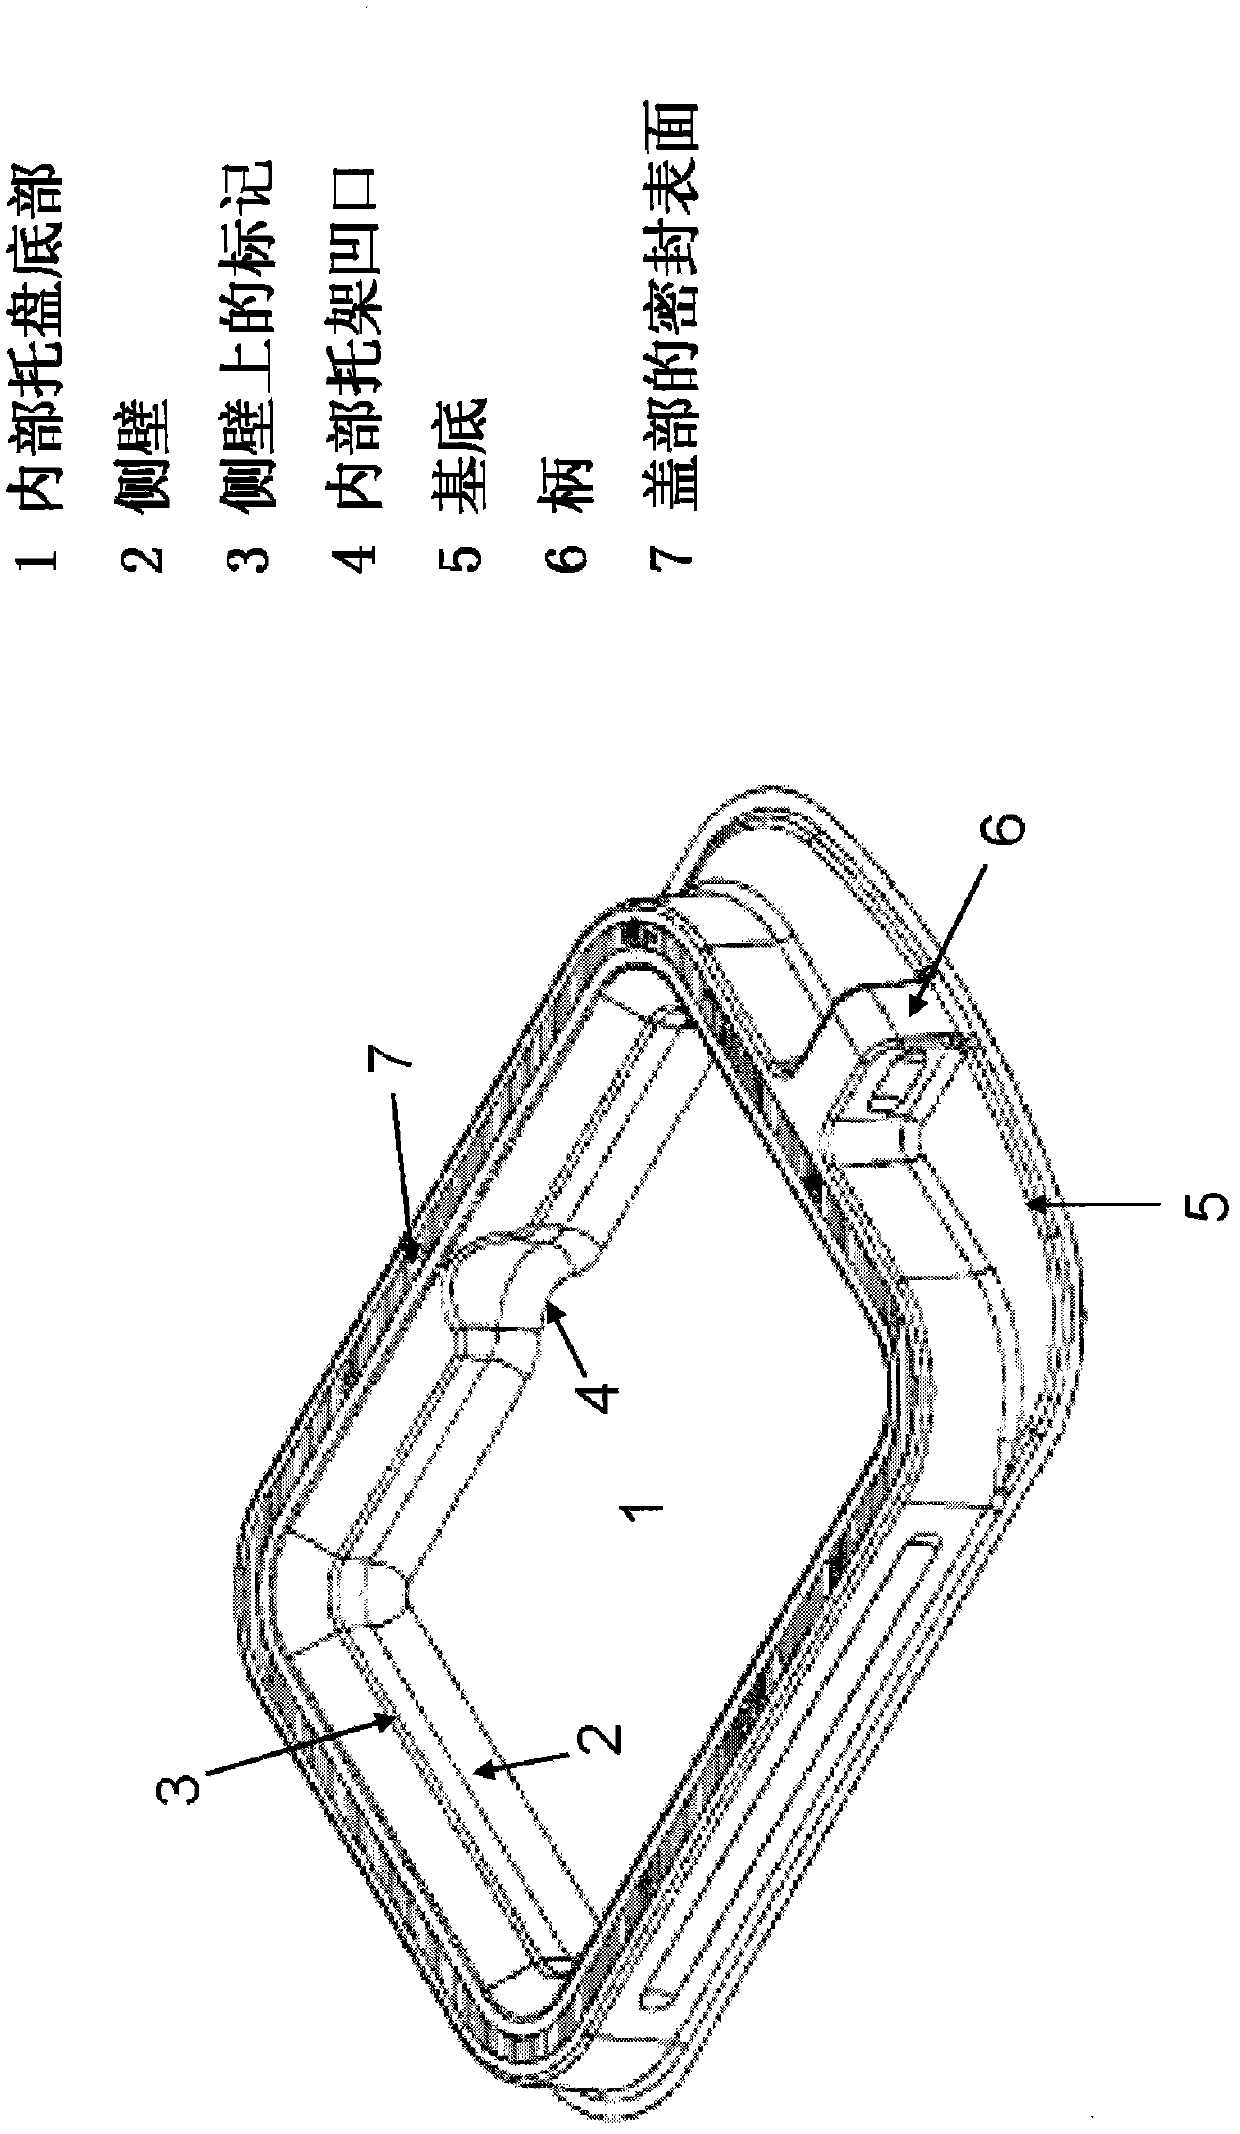 Device for promotion of hemostasis and/or wound healing